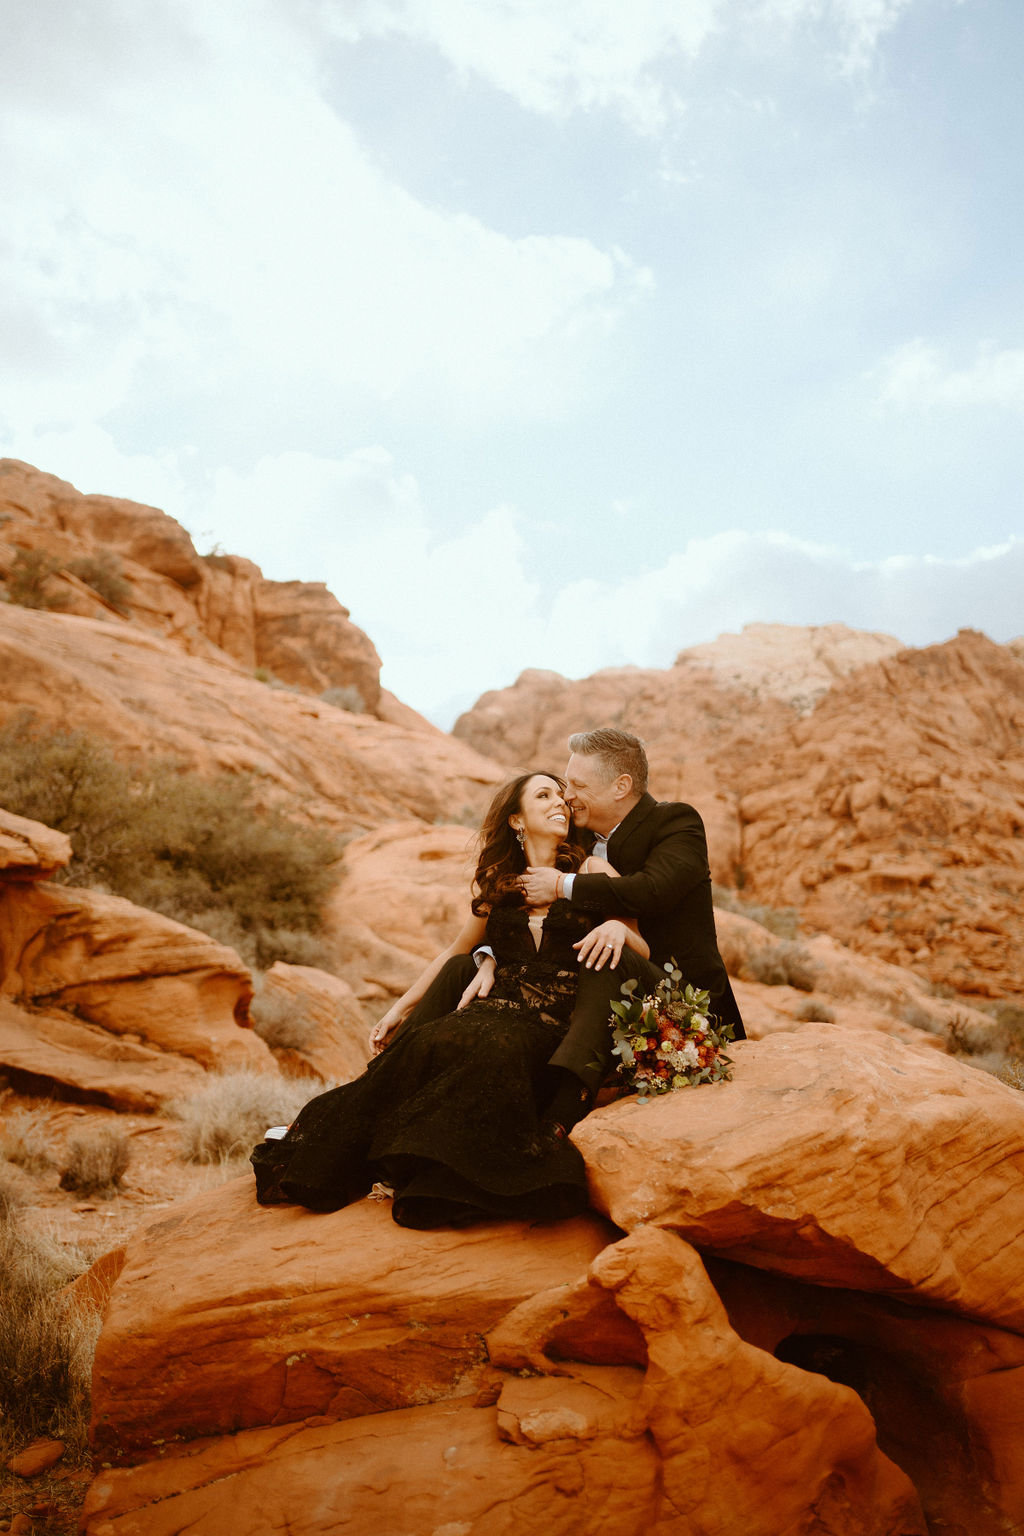 Elope In Vegas for Cheap: Is It Really Possible? Couple sharing an embrace during their elopement shoot.